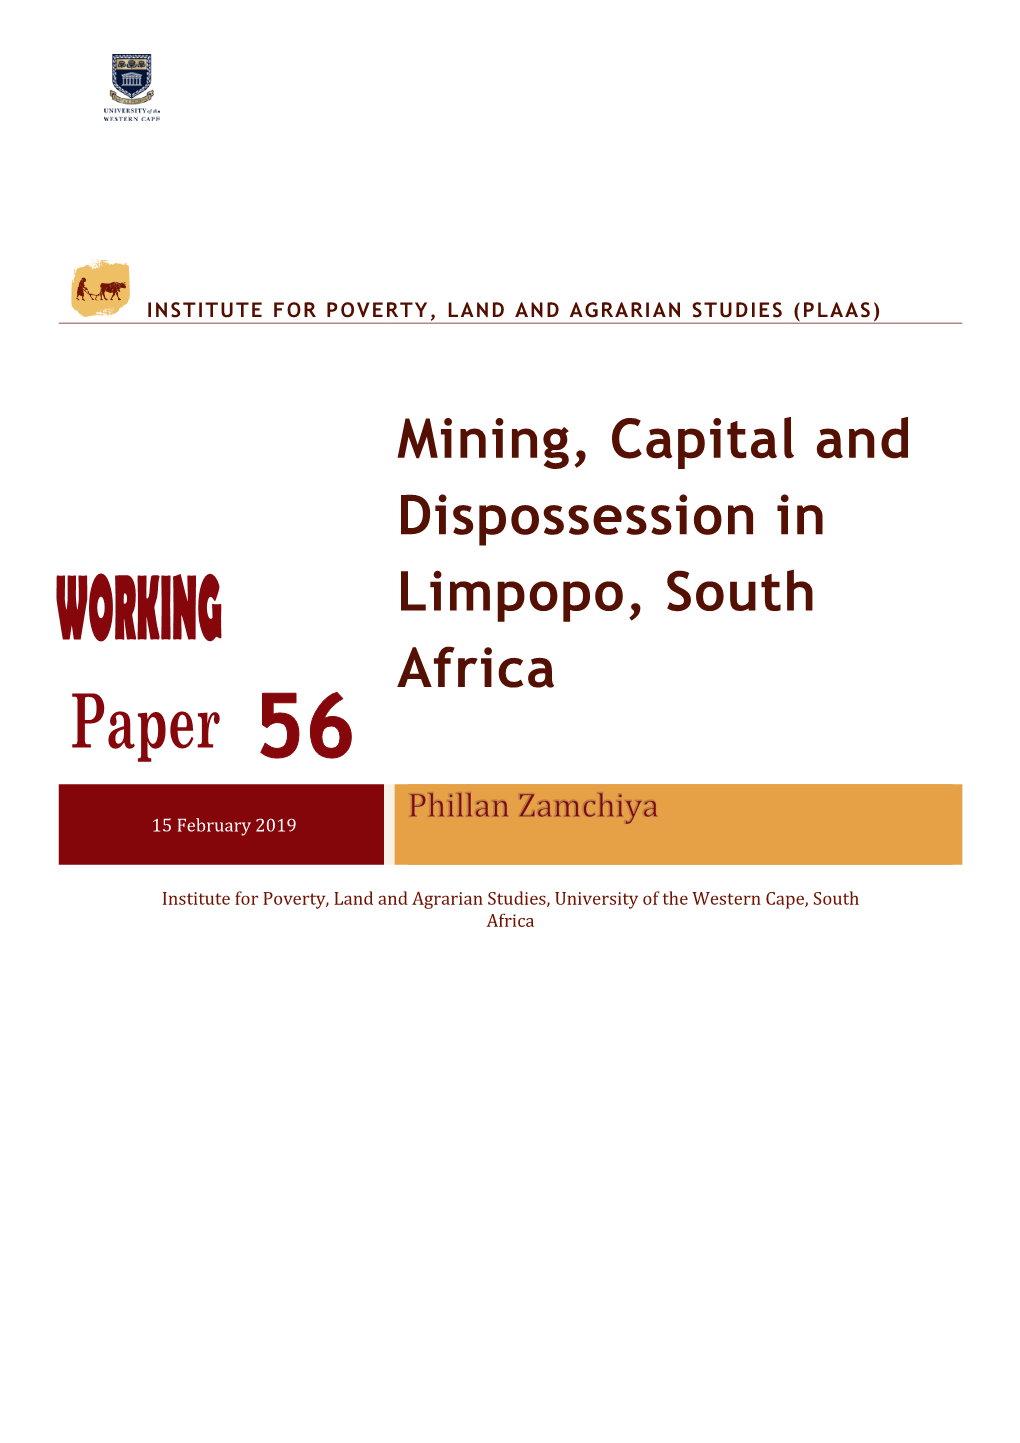 Mining, Capital and Dispossession in Limpopo, South Africa